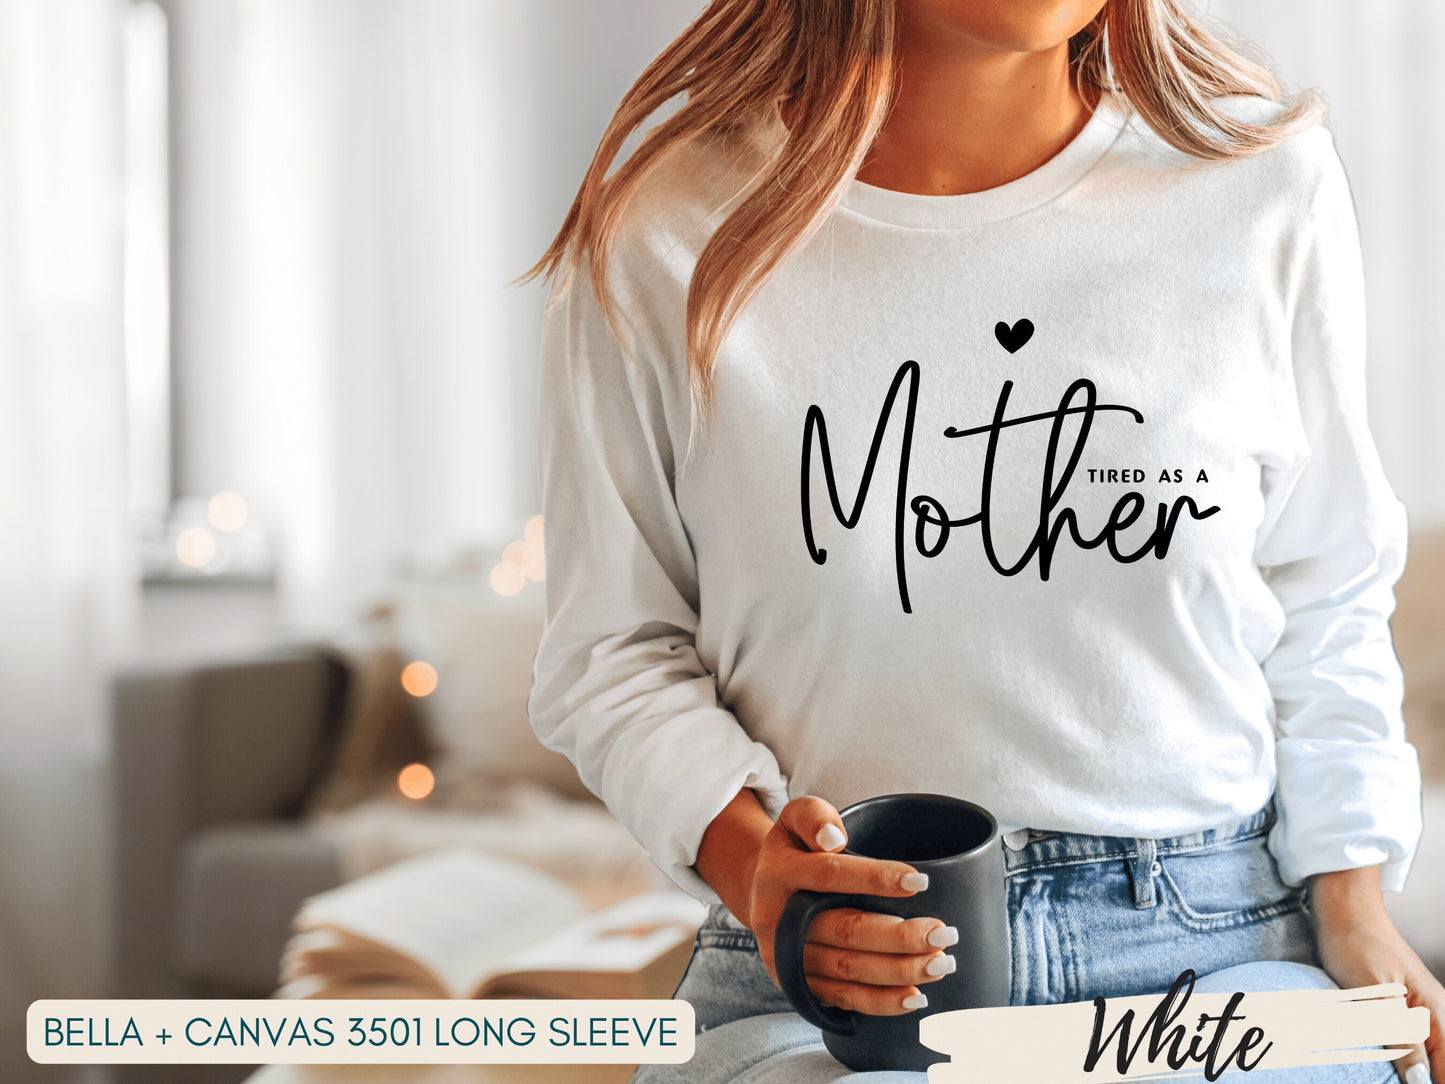 Tired As A Mother Shirt, Tired Moms Club Sweatshirt, Tired Mama, Mom Shirts, Mom Gifts, Mama Sweatshirt, Funny Mom Gift